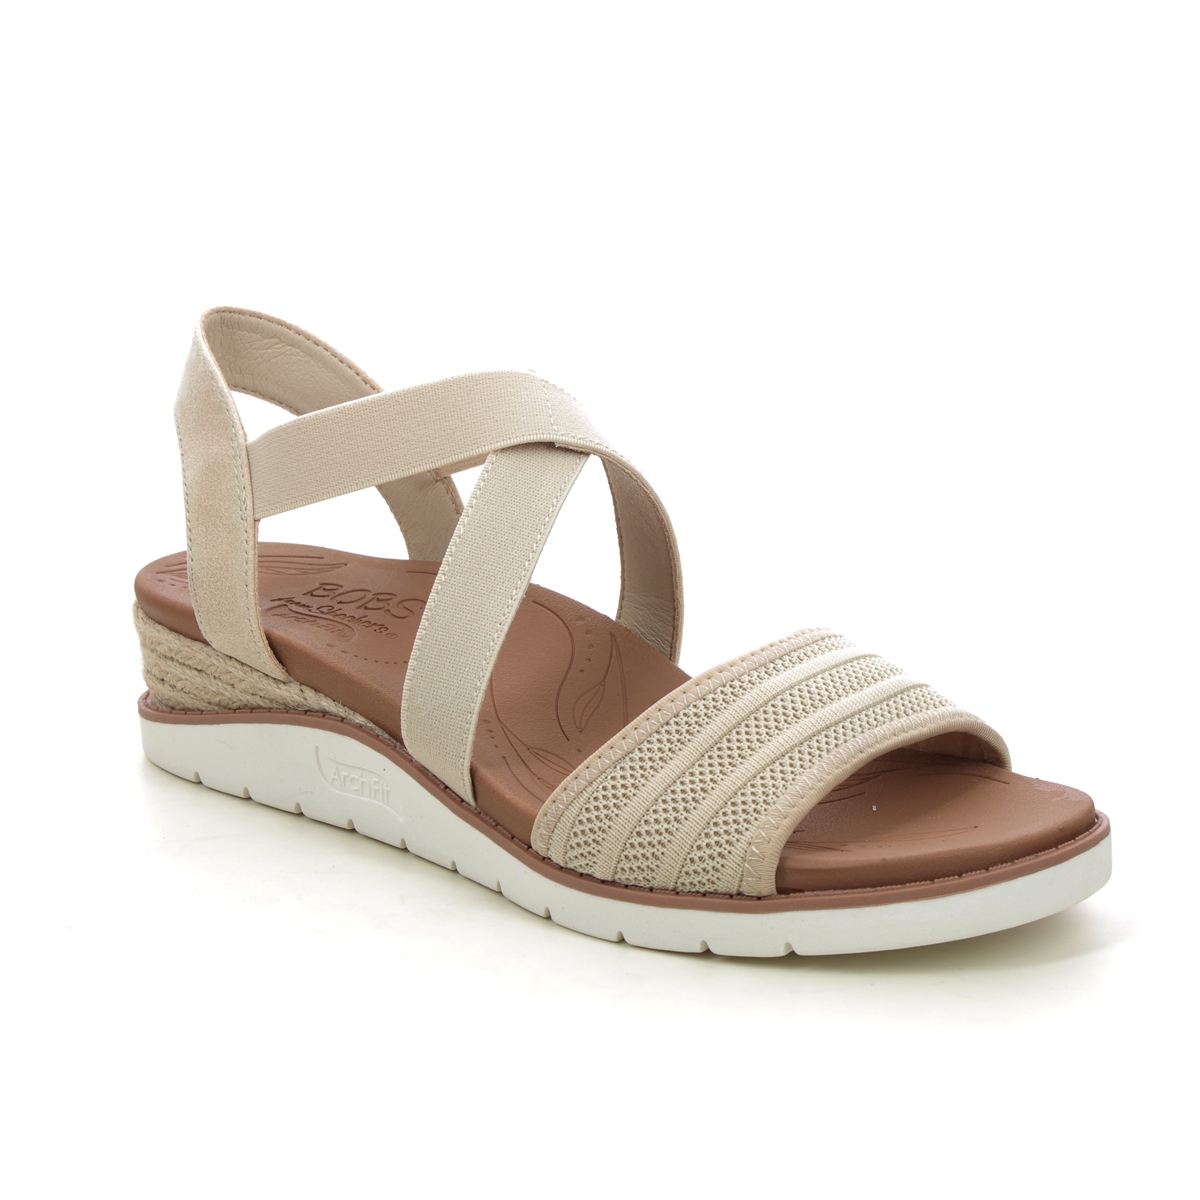 Skechers Bobs Desert Boho NAT Natural Womens Wedge Sandals 114013 in a Plain Textile in Size 4